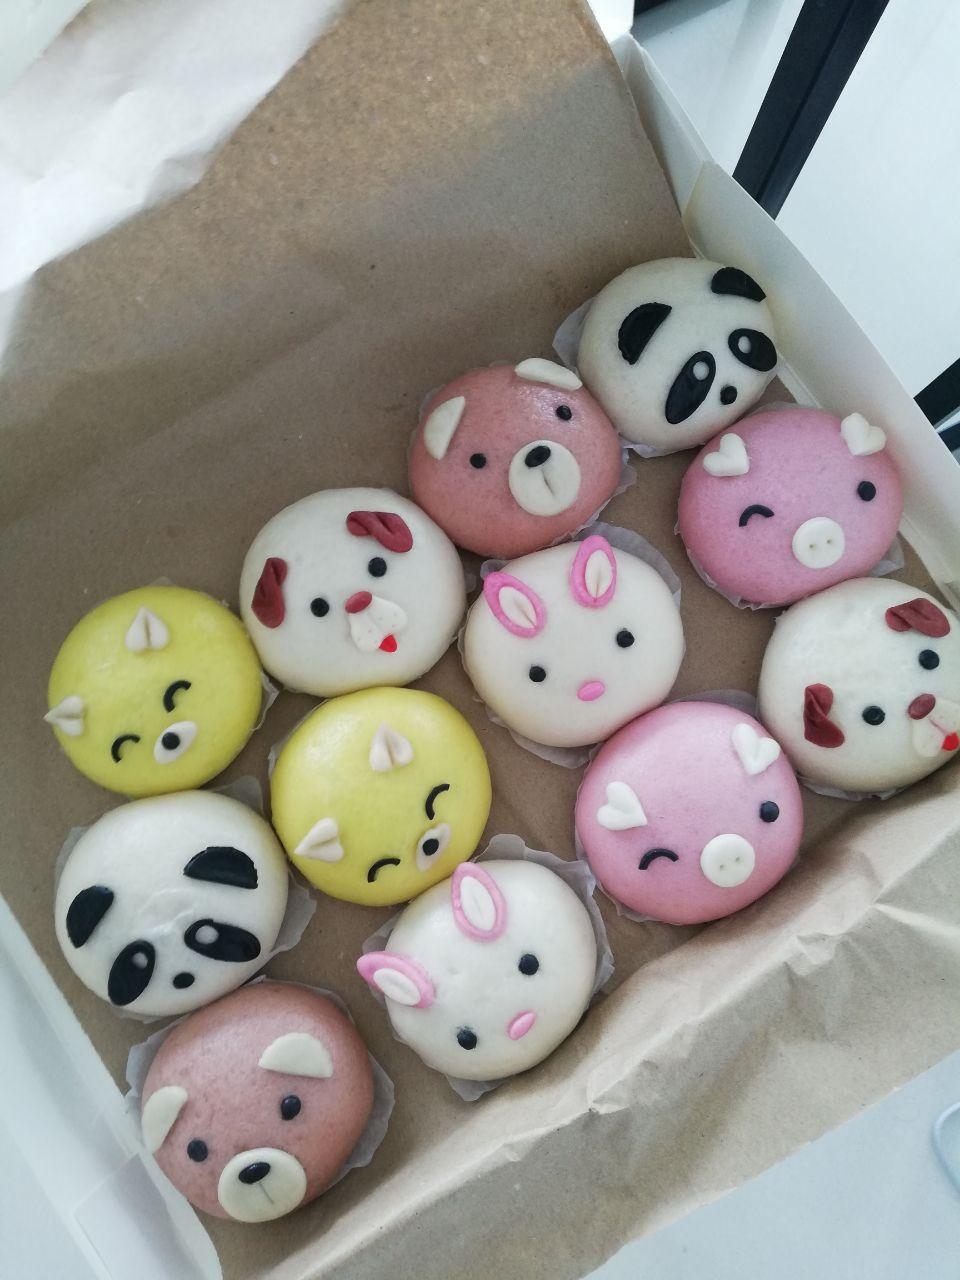 LOOK: These steamed buns are too cute to eat